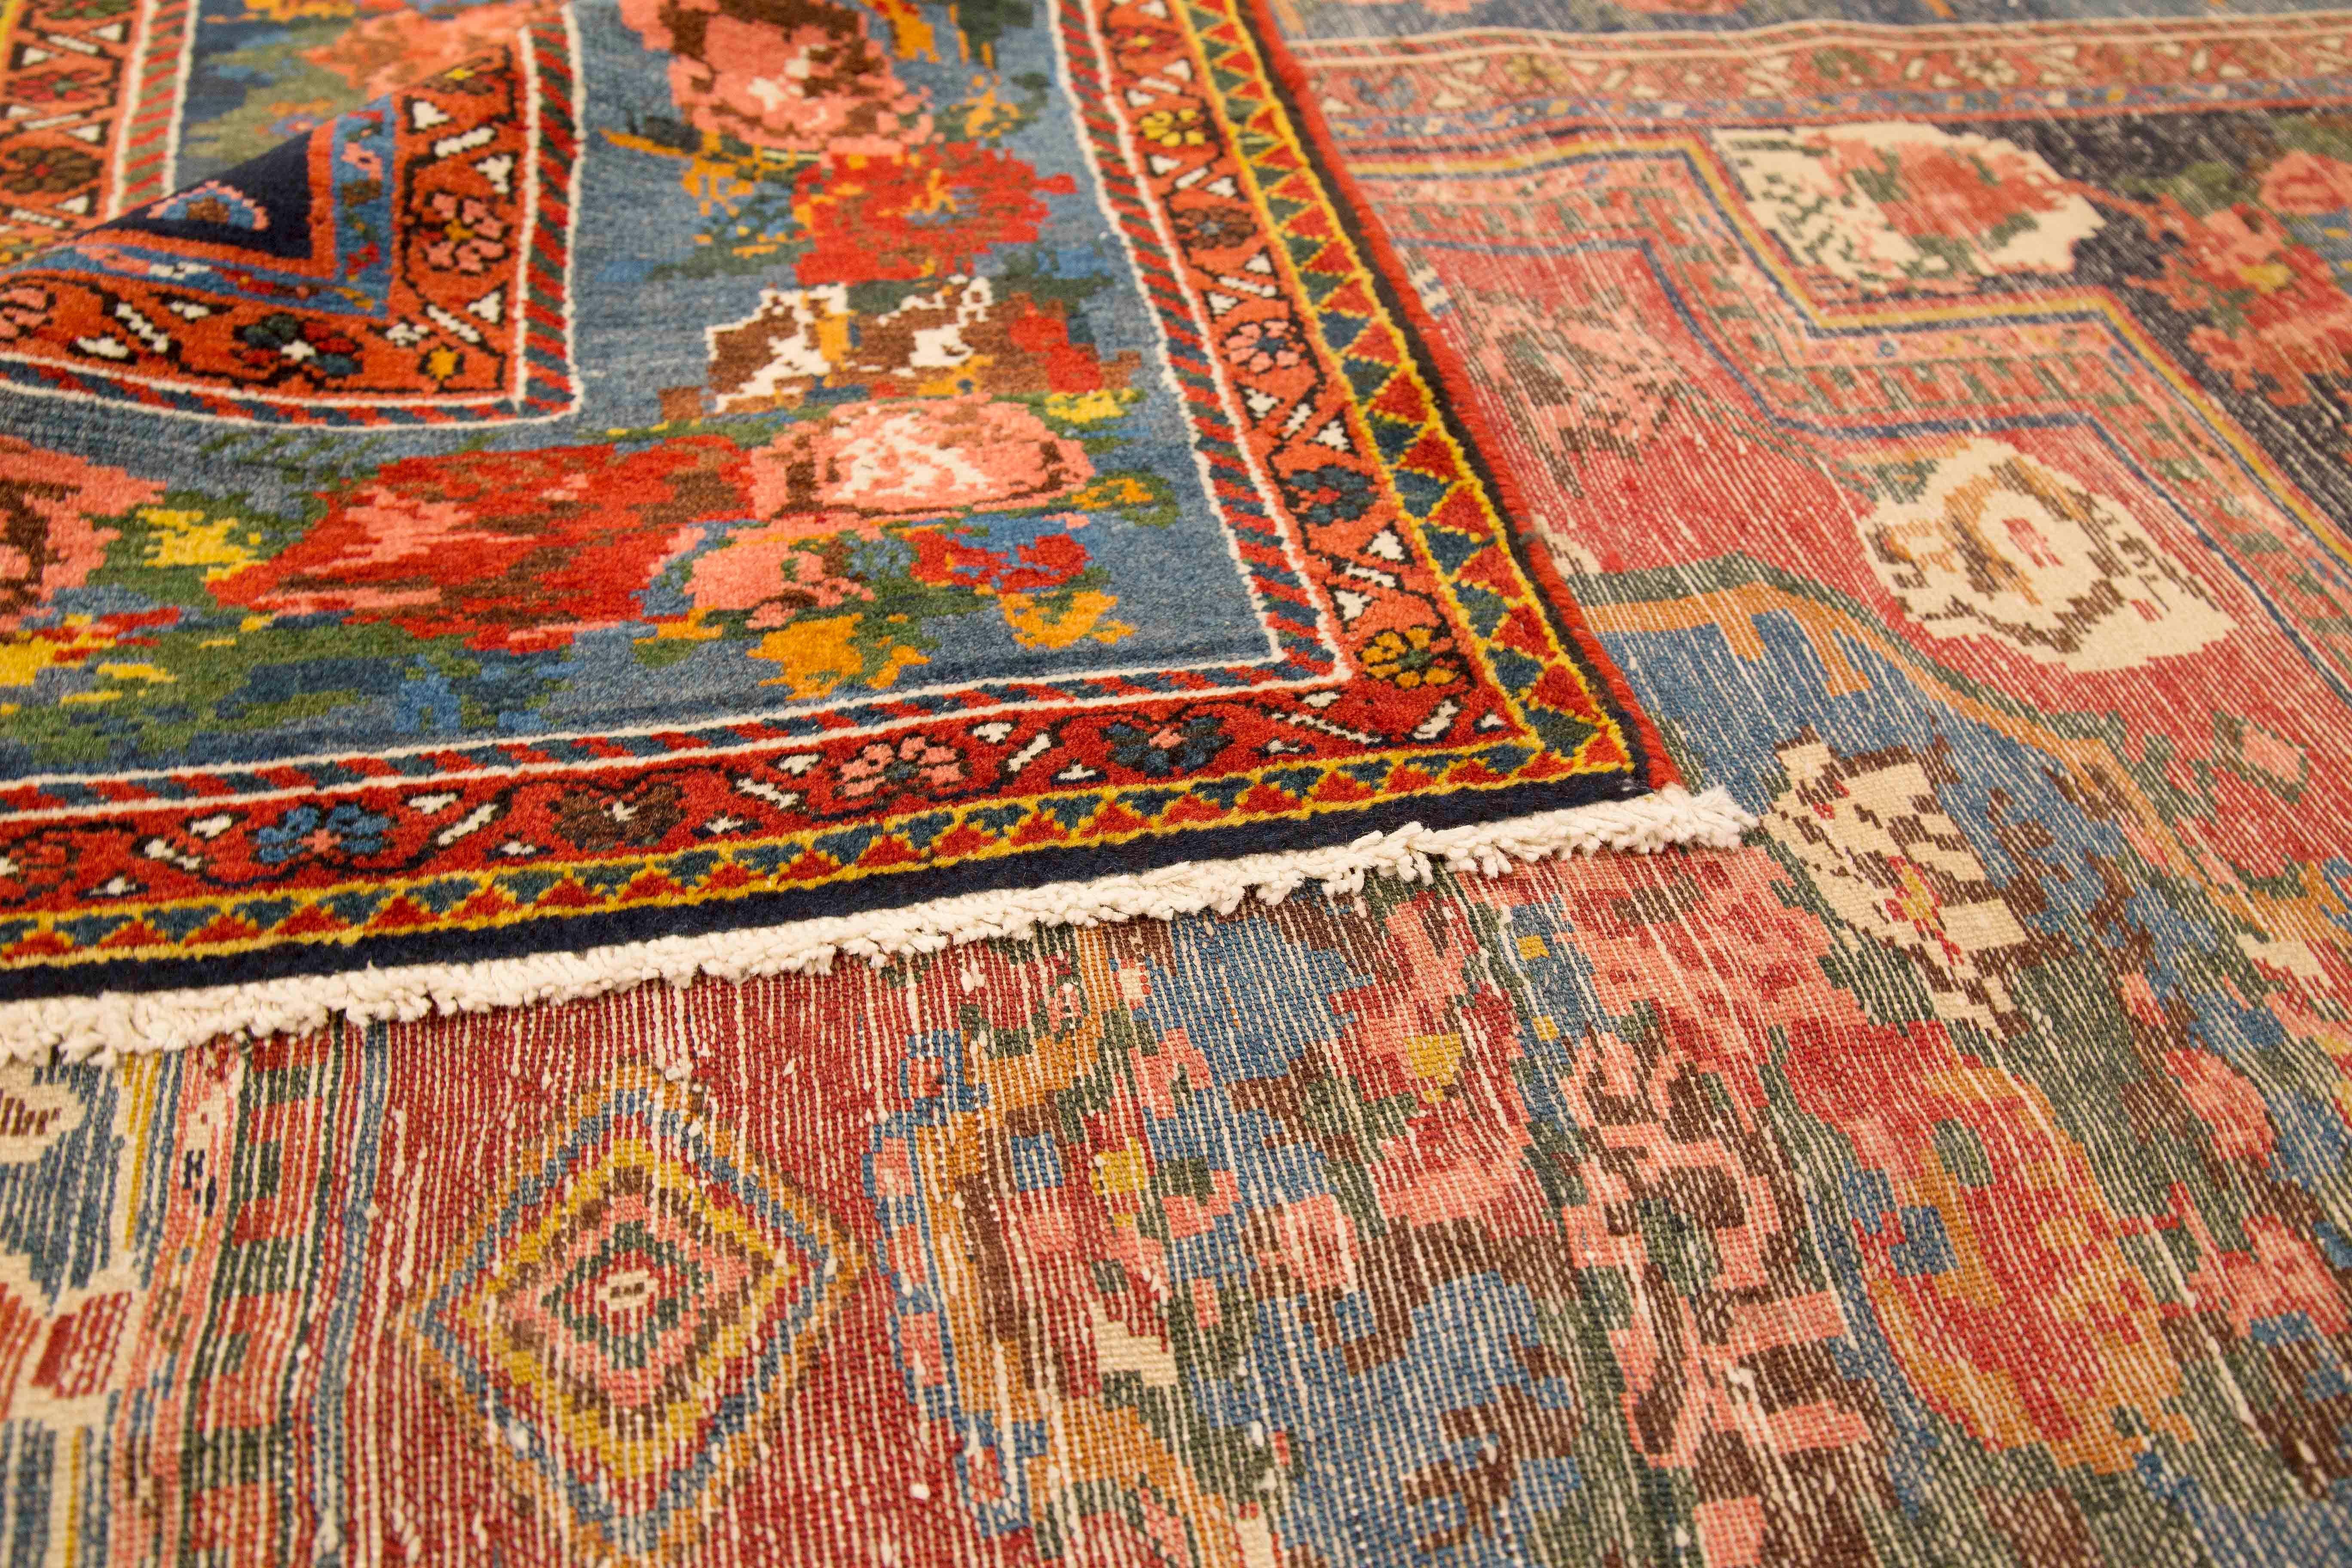 Hand-Woven Antique Persian Bakhtiar Rug with Blue and Red Floral Medallions For Sale